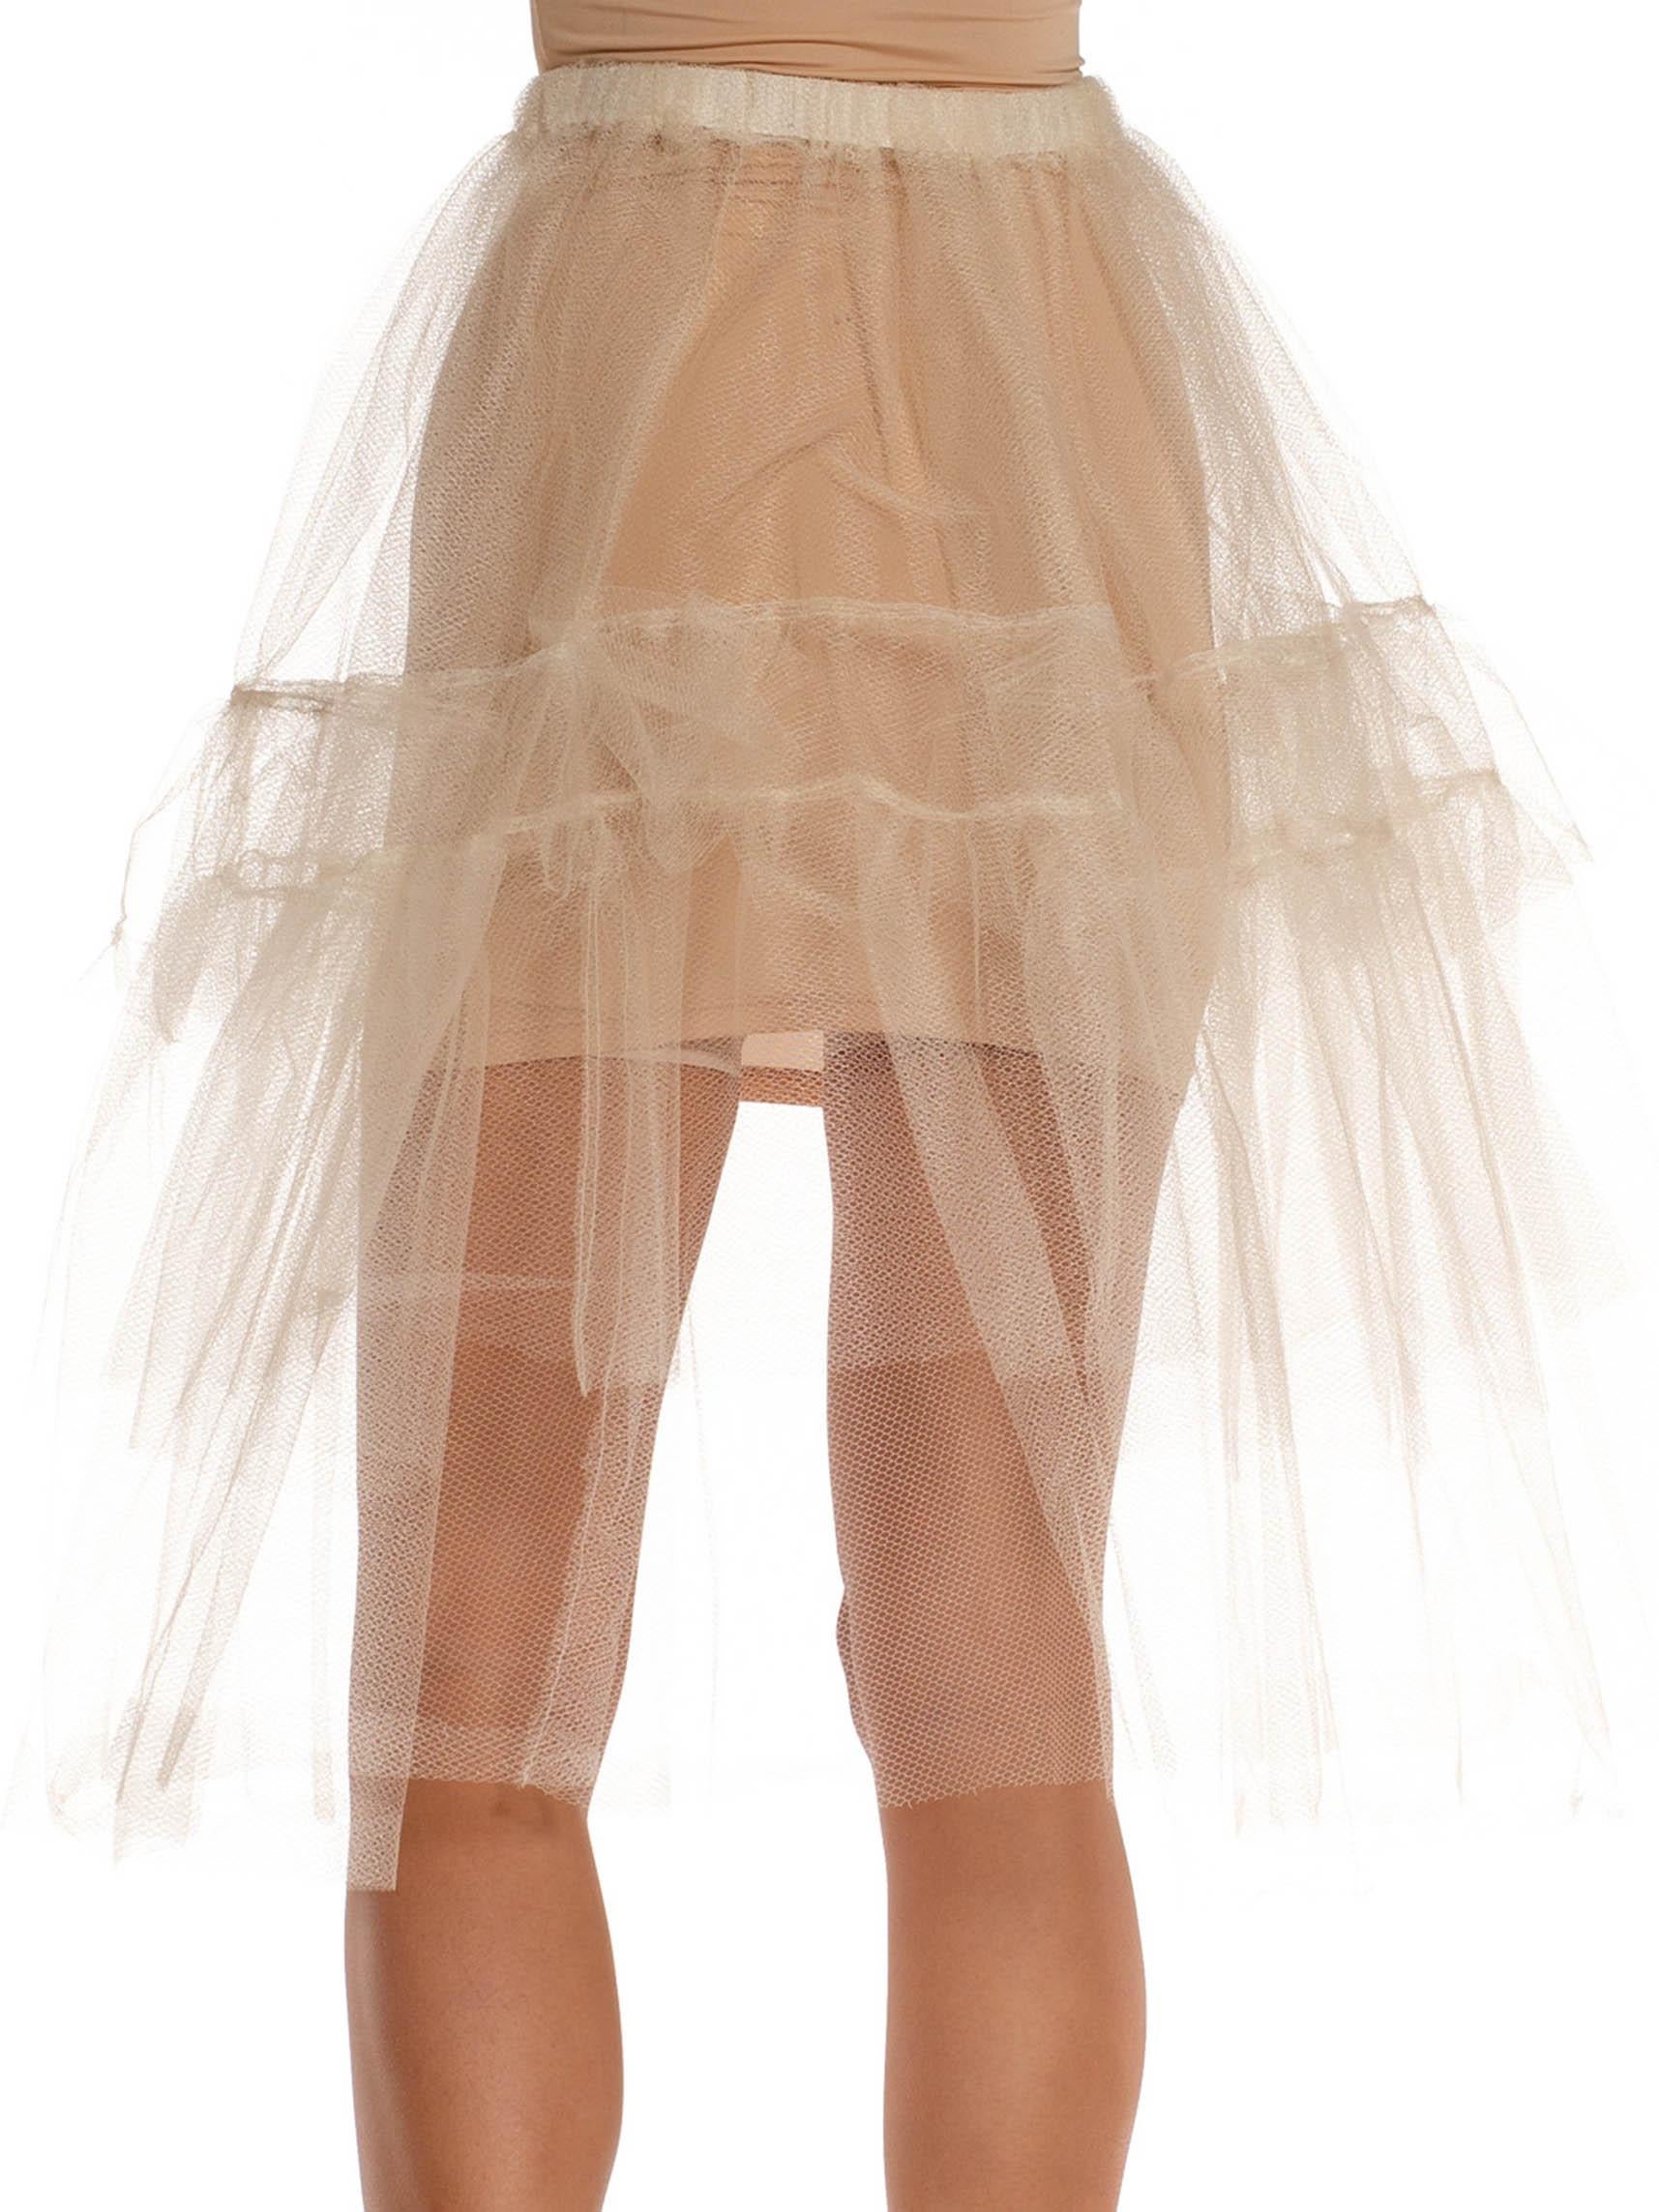 1980S White Tulle Tiered Tutu Skirt With Elastic Waistband In Excellent Condition For Sale In New York, NY